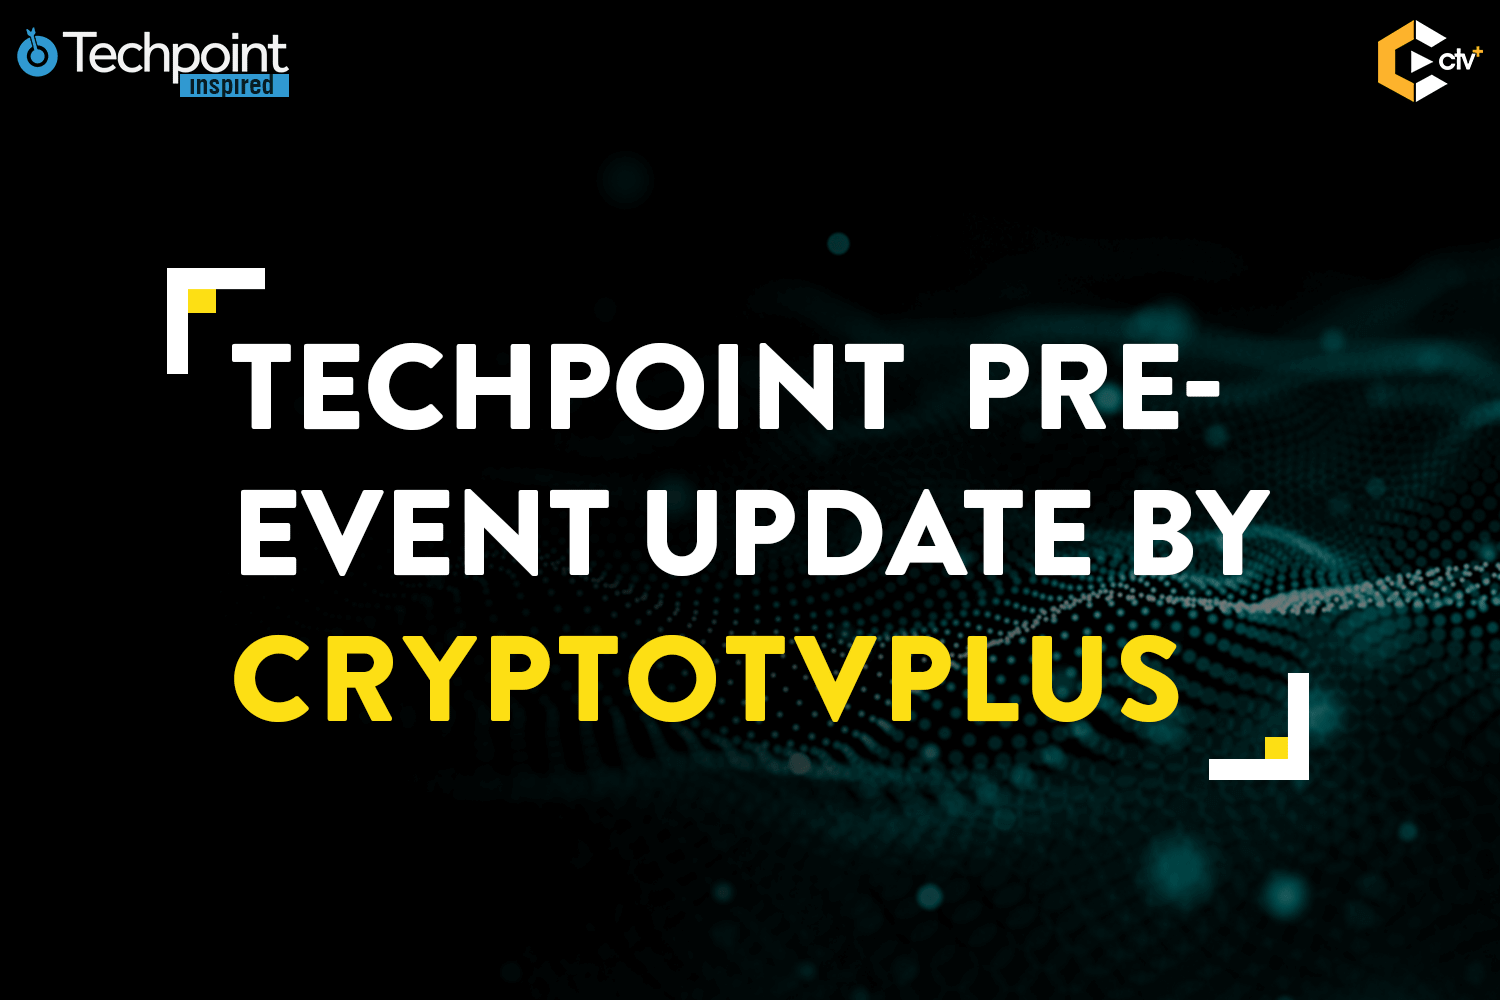 Techpoint Pre-event Update by Cryptotvplus